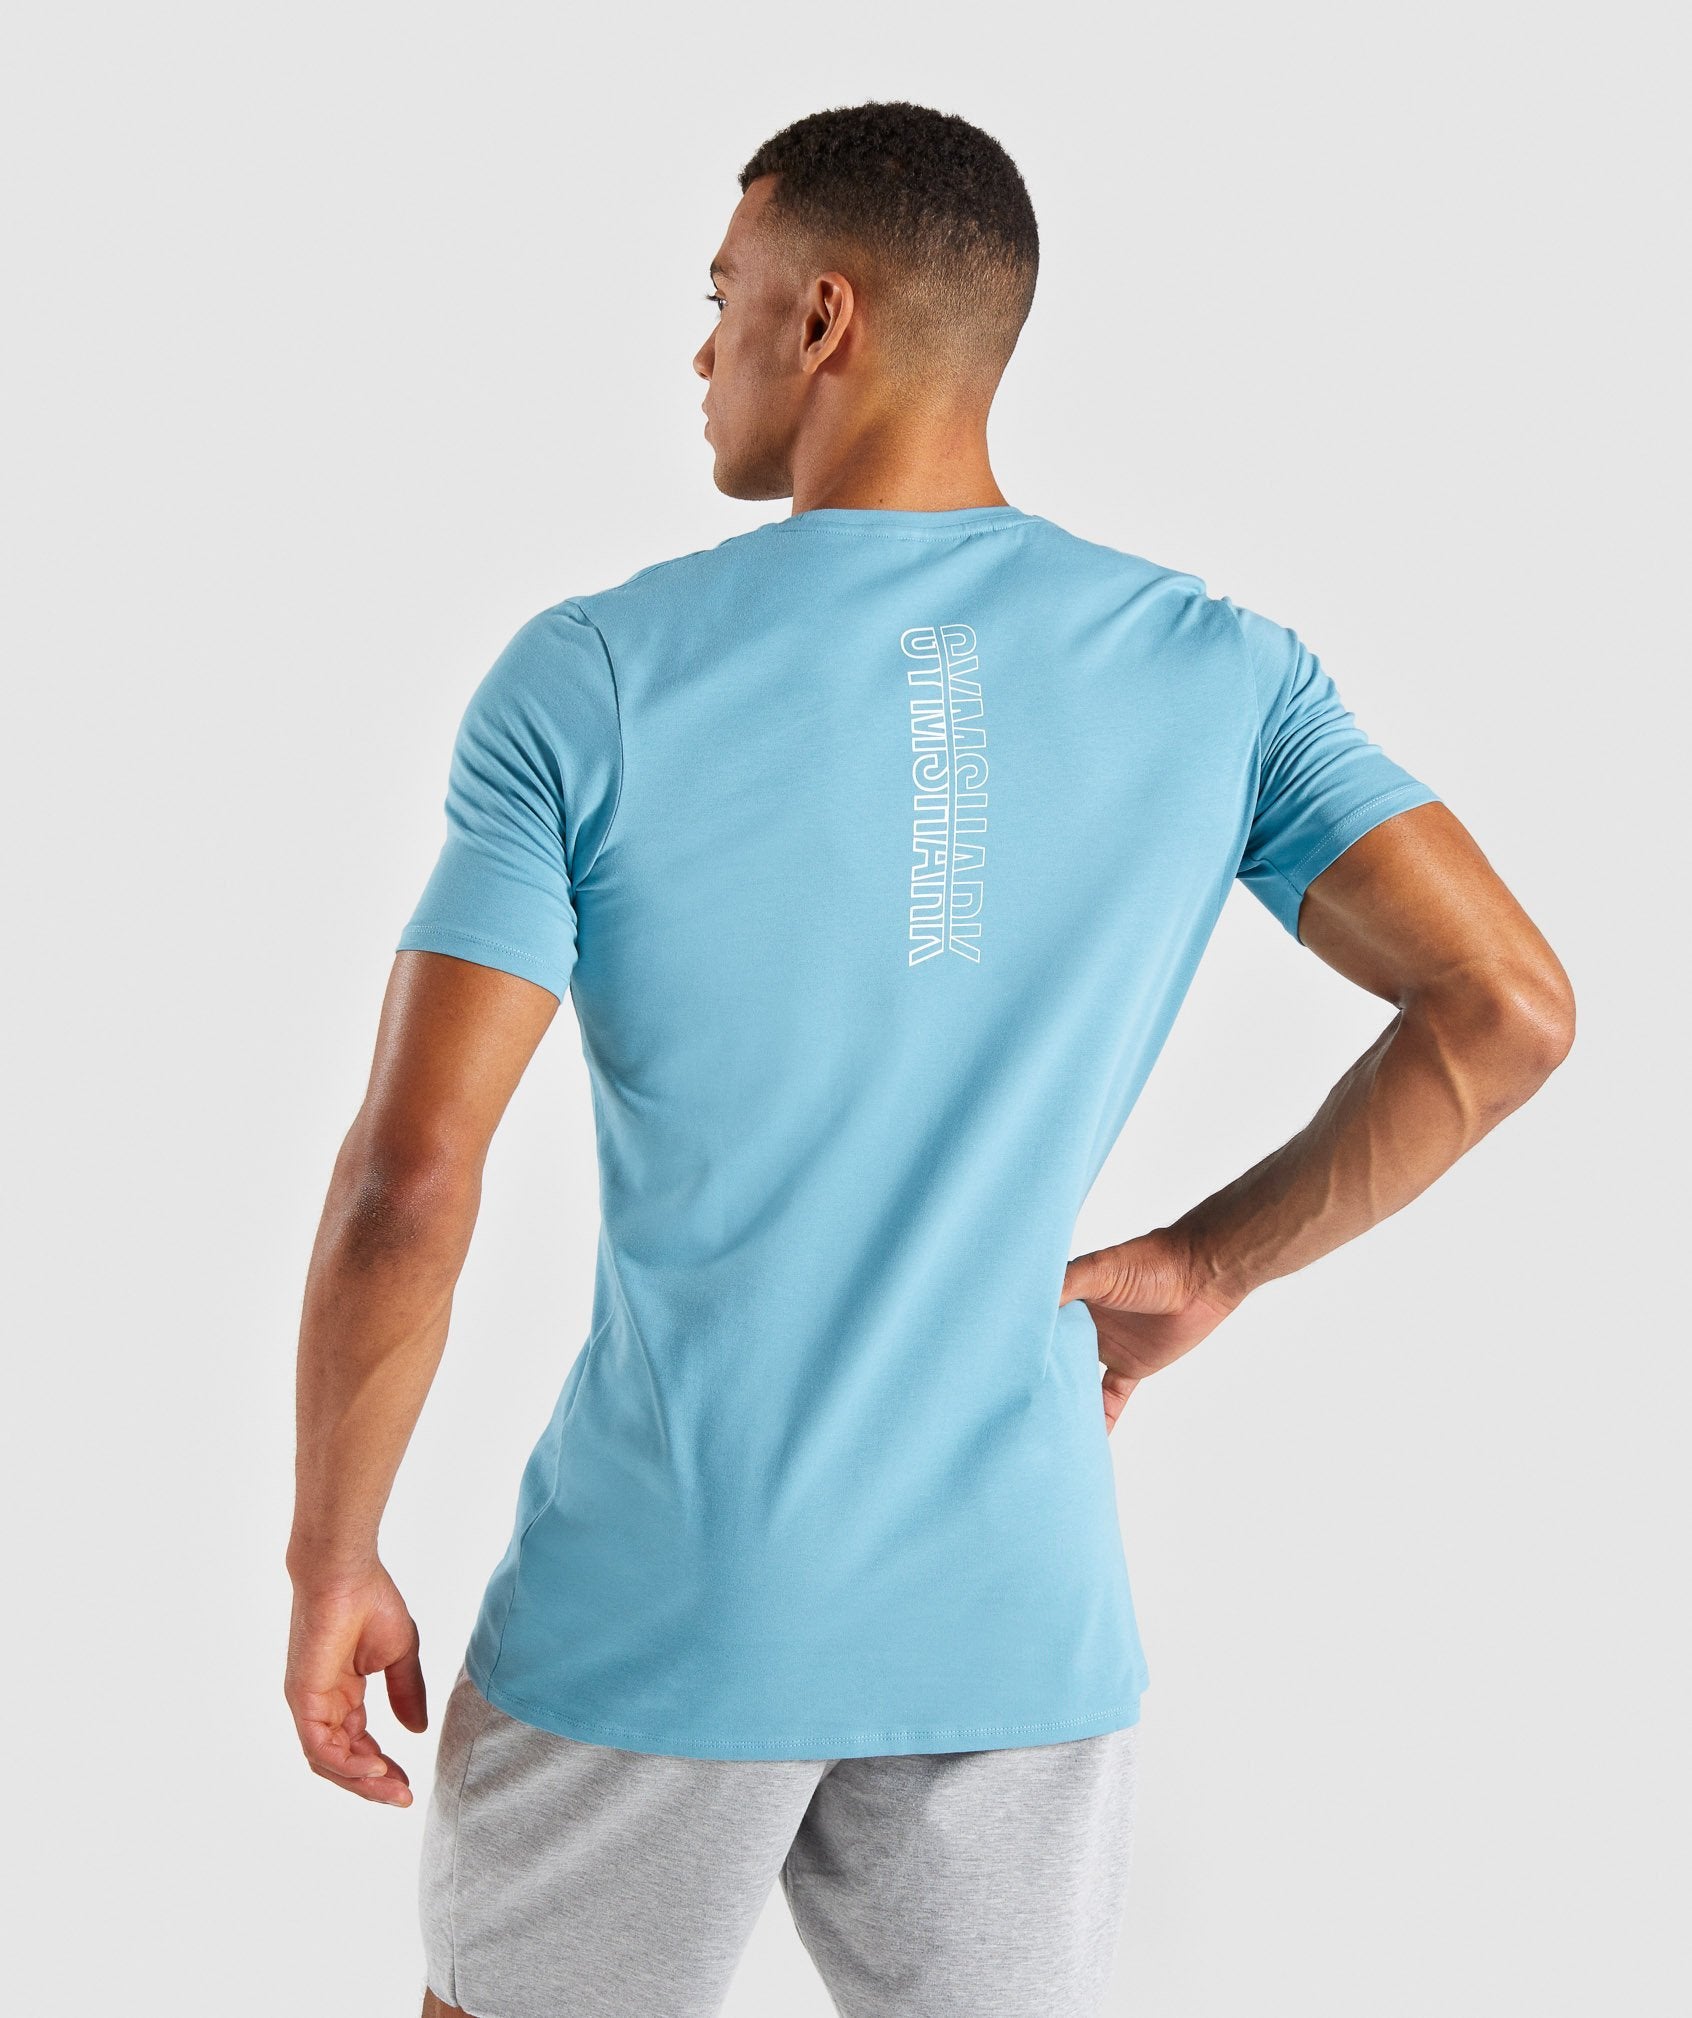 Minimal T-Shirt in Dusky Teal - view 2